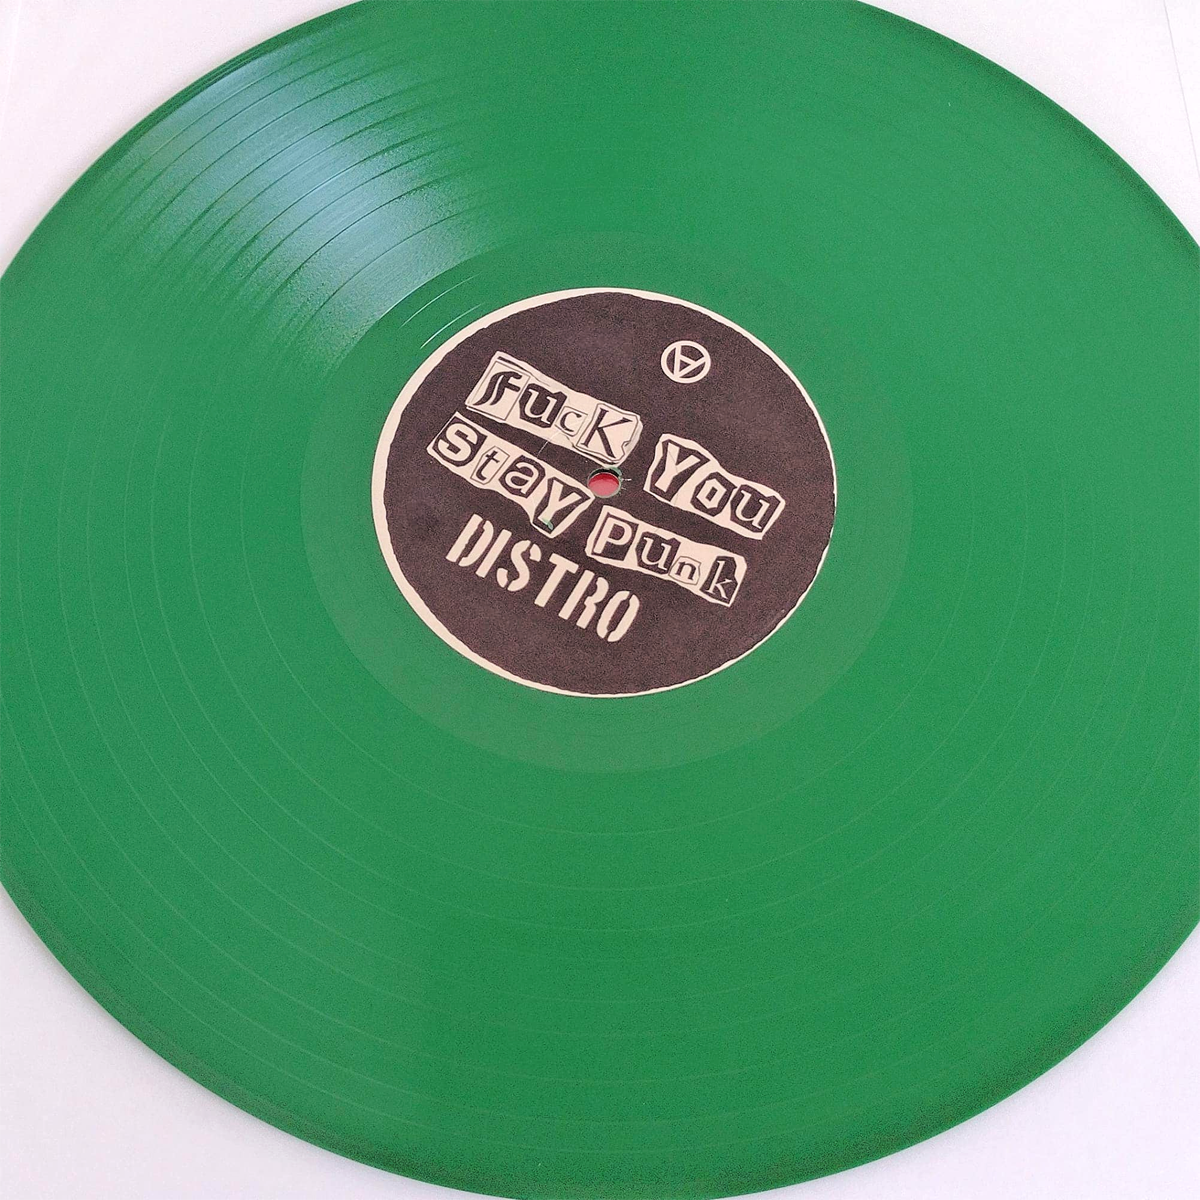 V/A- Chaos In The Streets: Global Extermination LP ~GREEN WAX W/ GIANT POSTER INSERT!